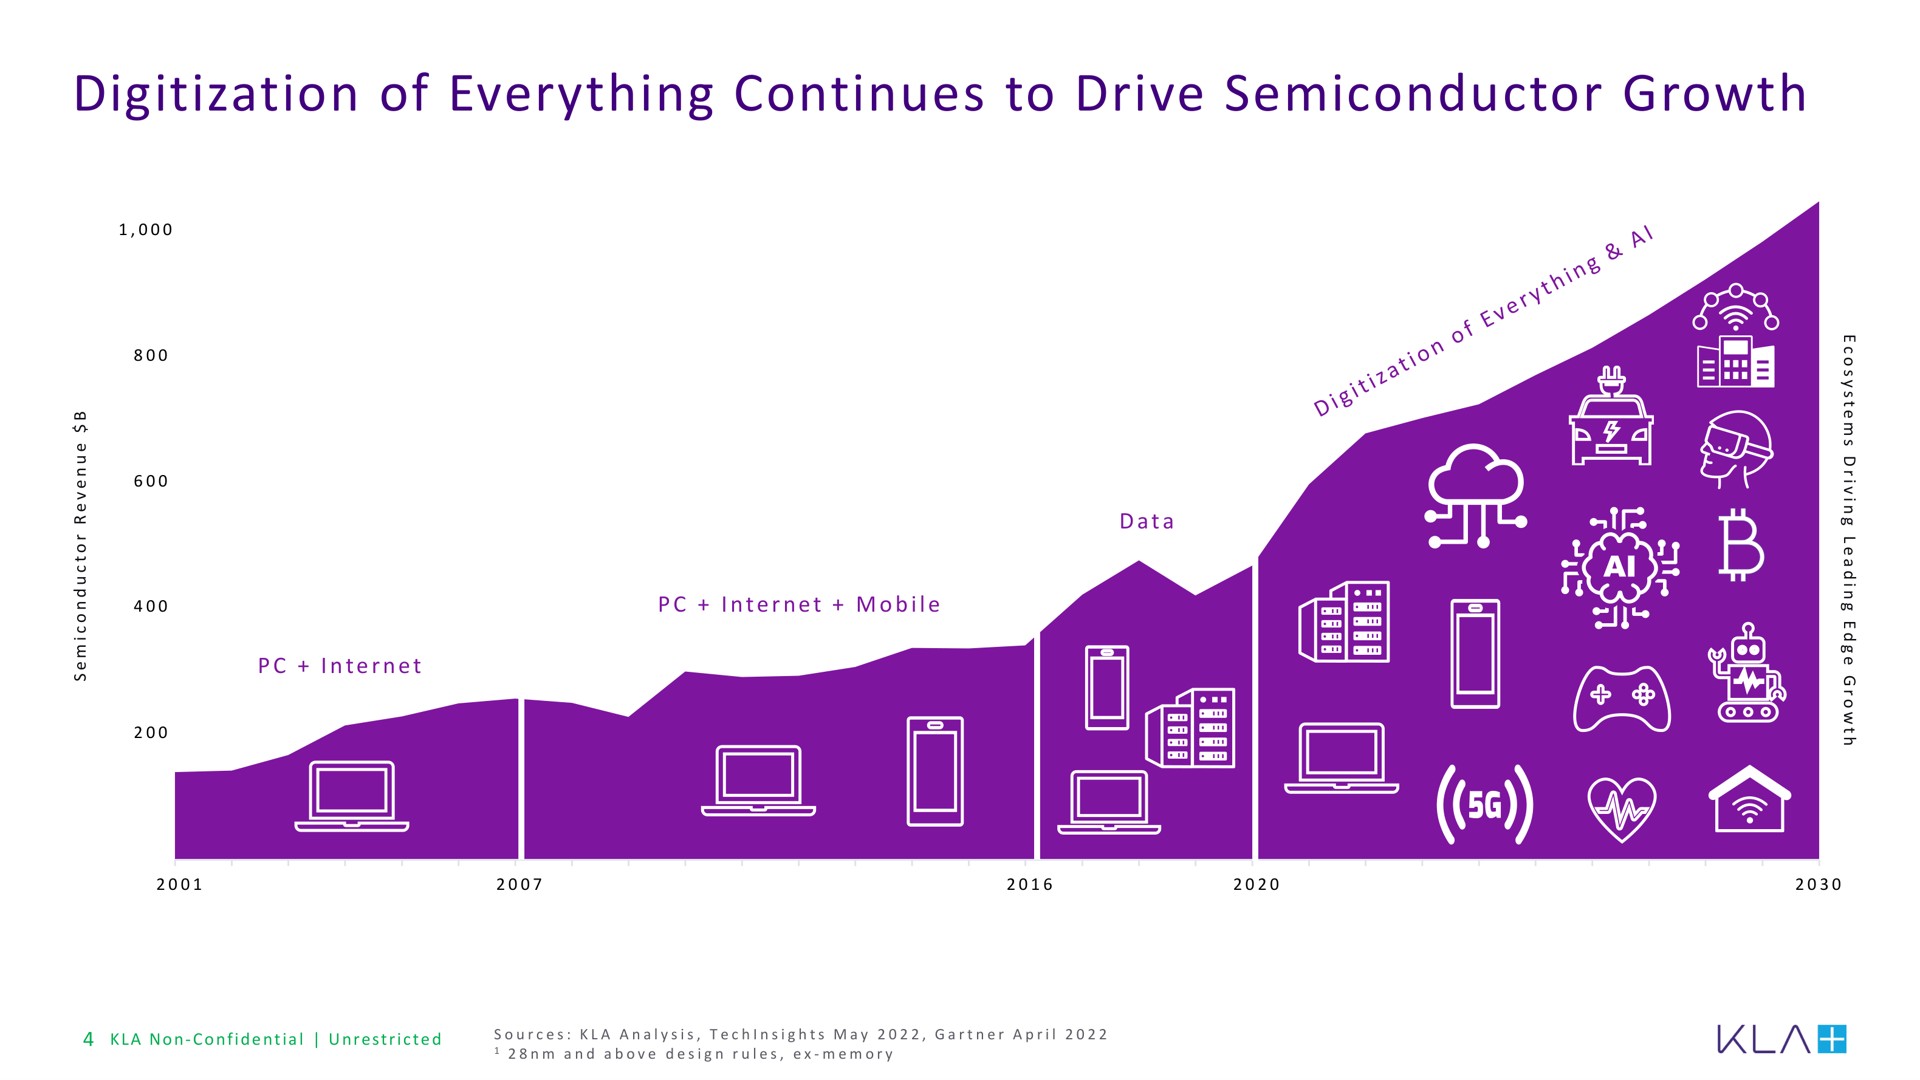 of everything continues to drive semiconductor growth i | KLA